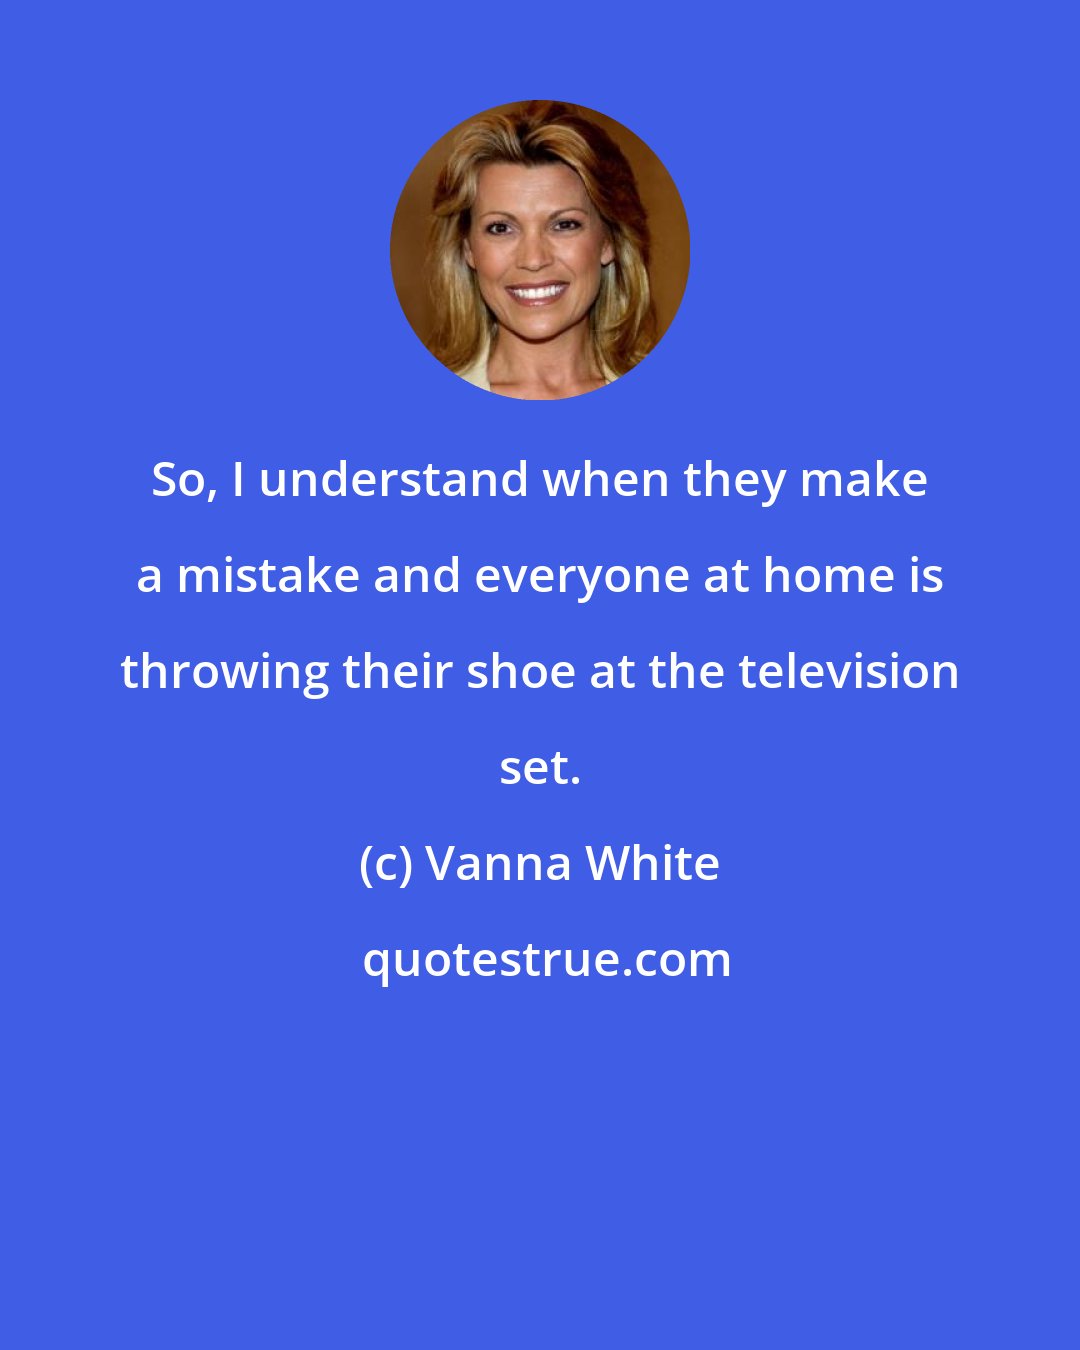 Vanna White: So, I understand when they make a mistake and everyone at home is throwing their shoe at the television set.